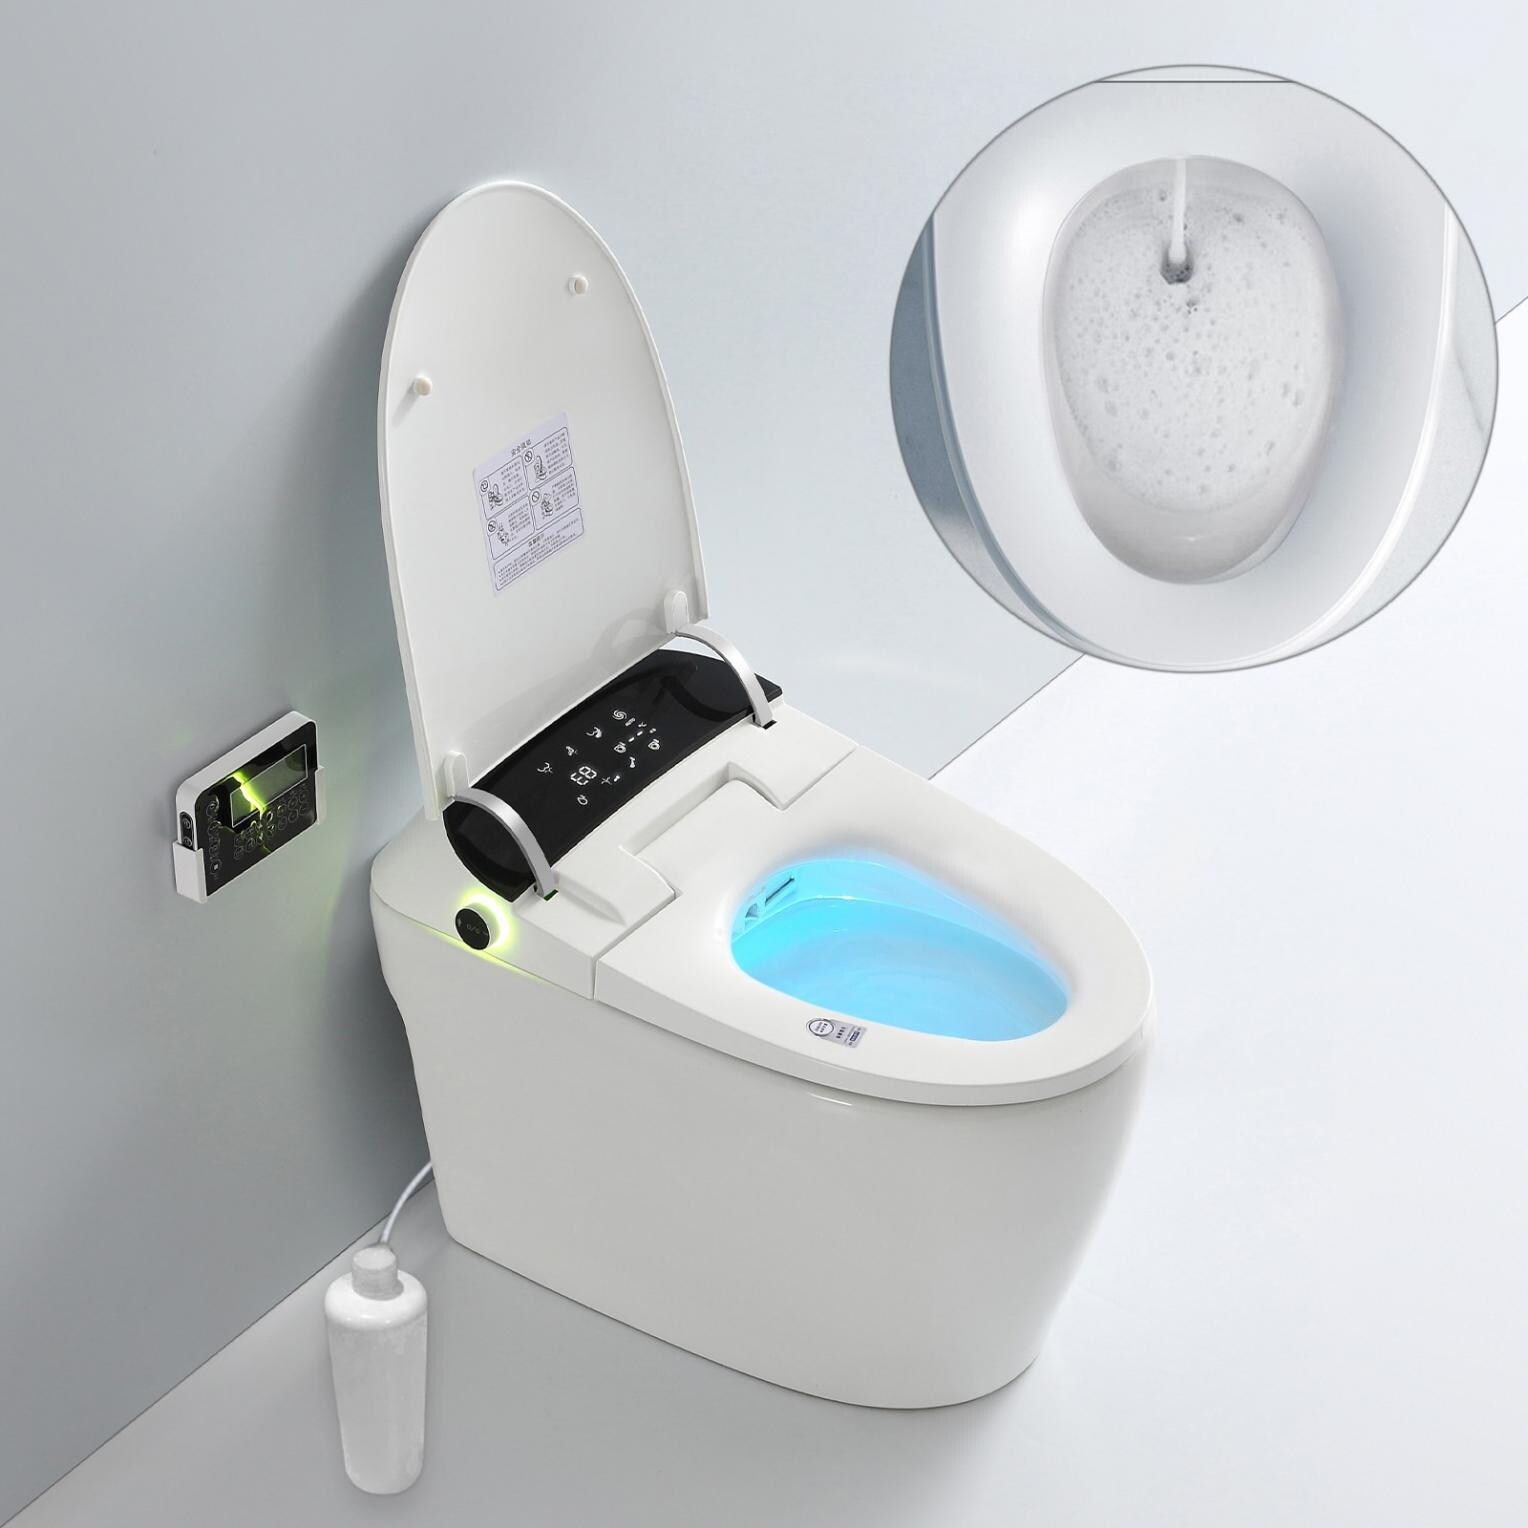 Bathroom Toilets With Advance Bidet And Soft Closing Seat